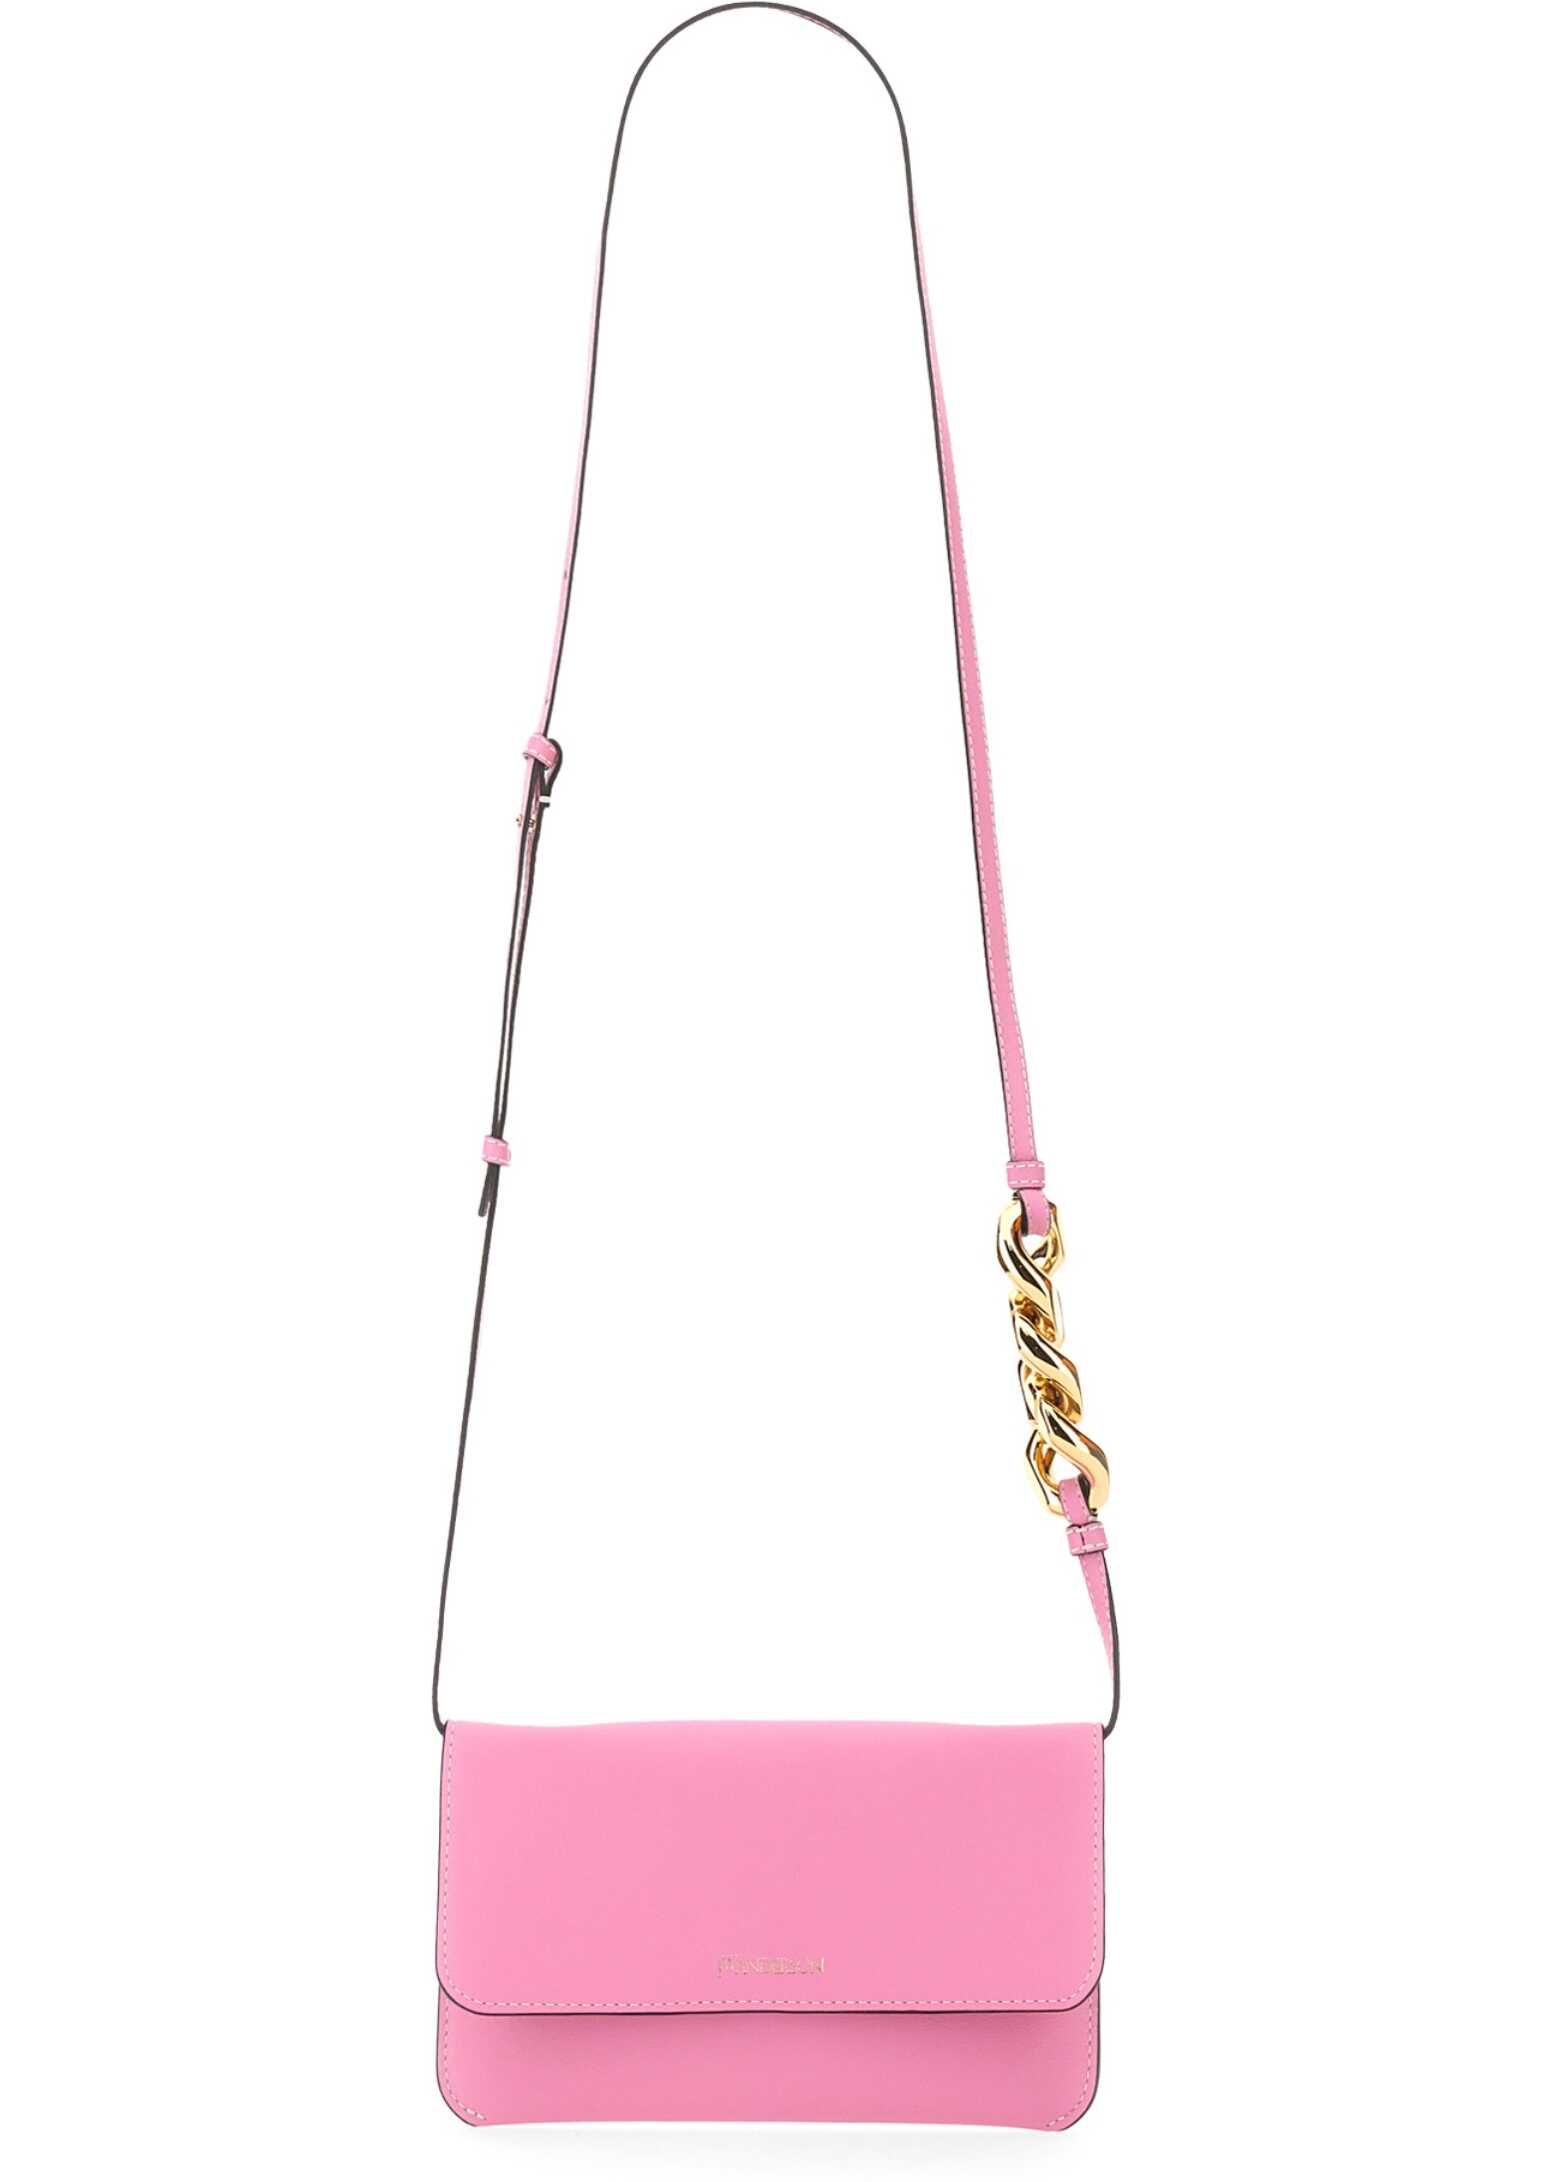 JW Anderson Leather Chain Smartphone Bag PINK